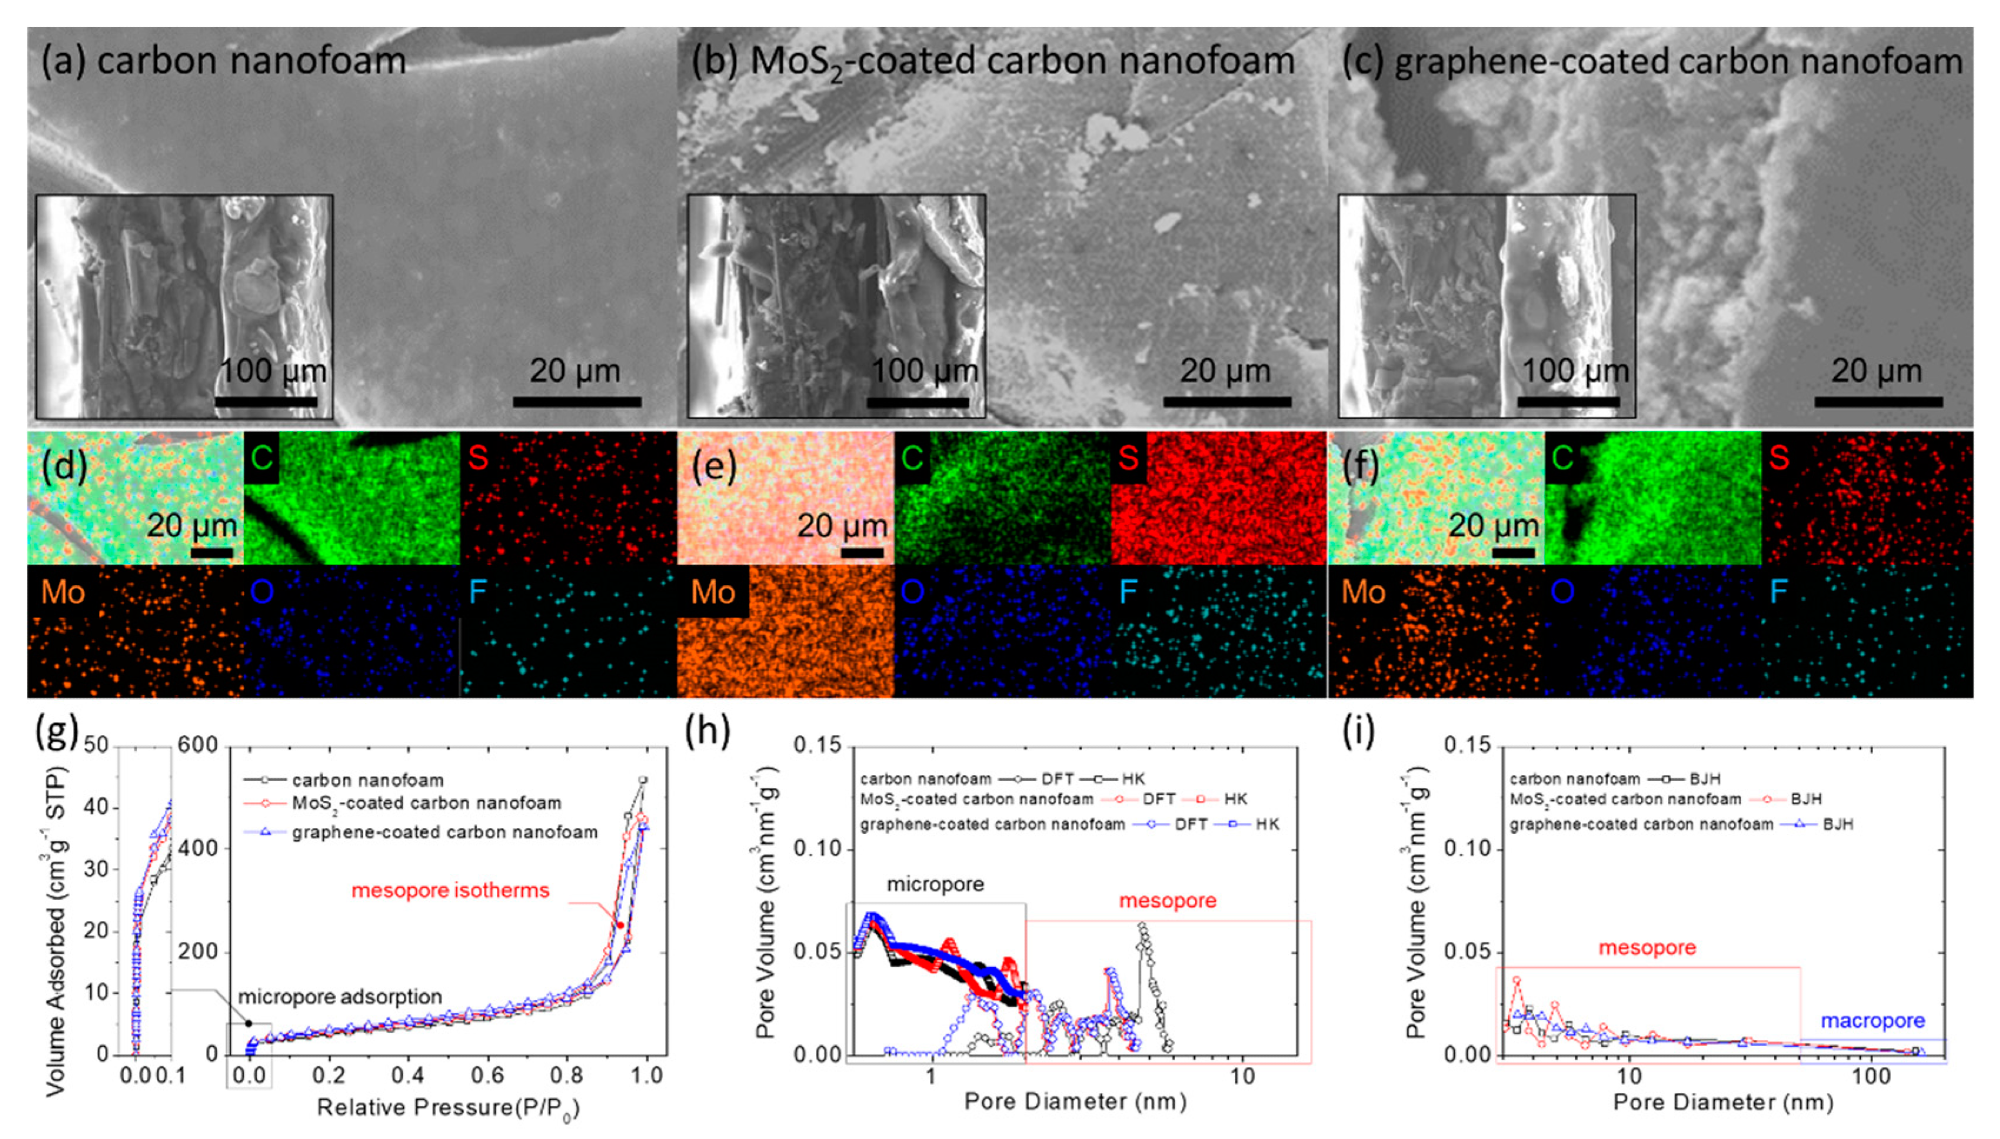 Material characterization: microstructural inspection of the (a) carbon nanofoam, (b) MoS2-coated carbon nanofoam, and (c) graphene-coated carbon nanofoam by field-emission scanning electron microscopy (insets are the cross-sectional inspection); elemental mapping results of the (d) carbon nanofoam, (e) MoS2-coated carbon nanofoam, and (f) graphene-coated carbon nanofoam by energy-dispersive X-ray spectroscopy; porosity analysis with (g) nitrogen adsorption/desorption isotherms, (h) pore size distribution calculated with density functional